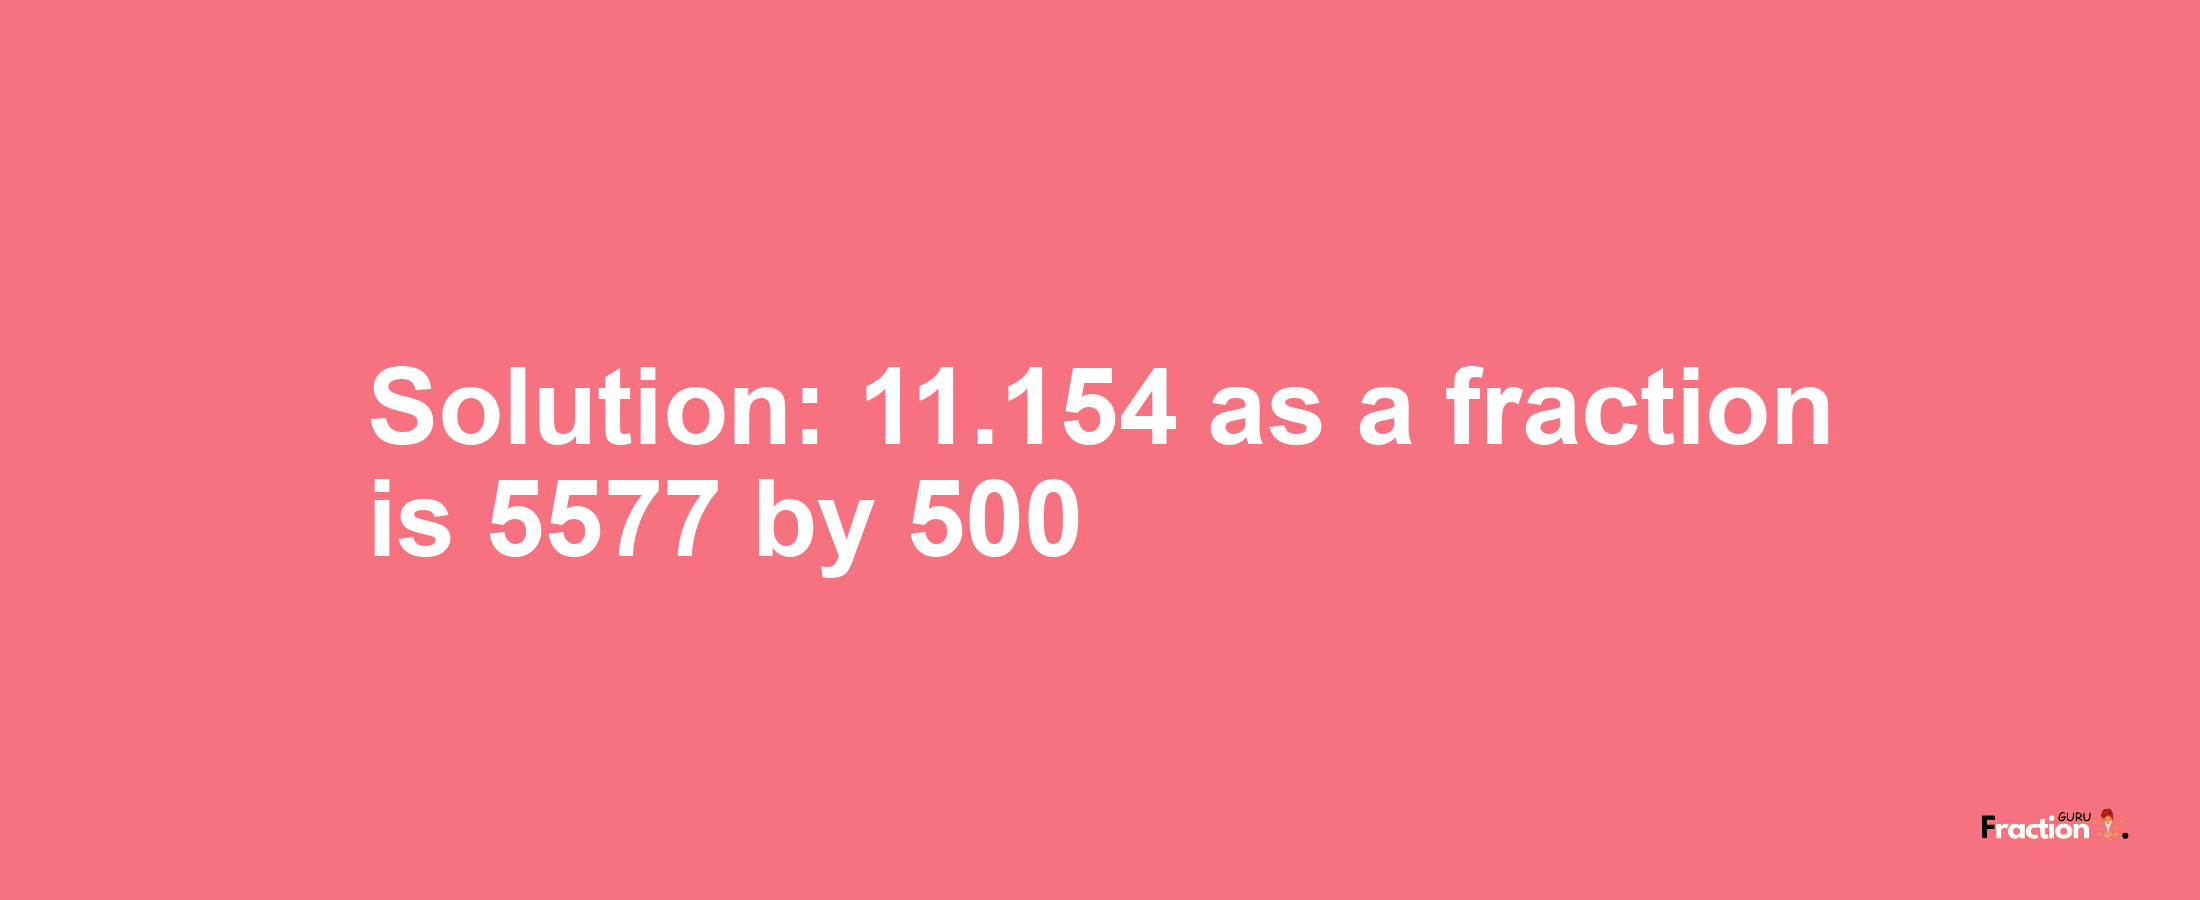 Solution:11.154 as a fraction is 5577/500